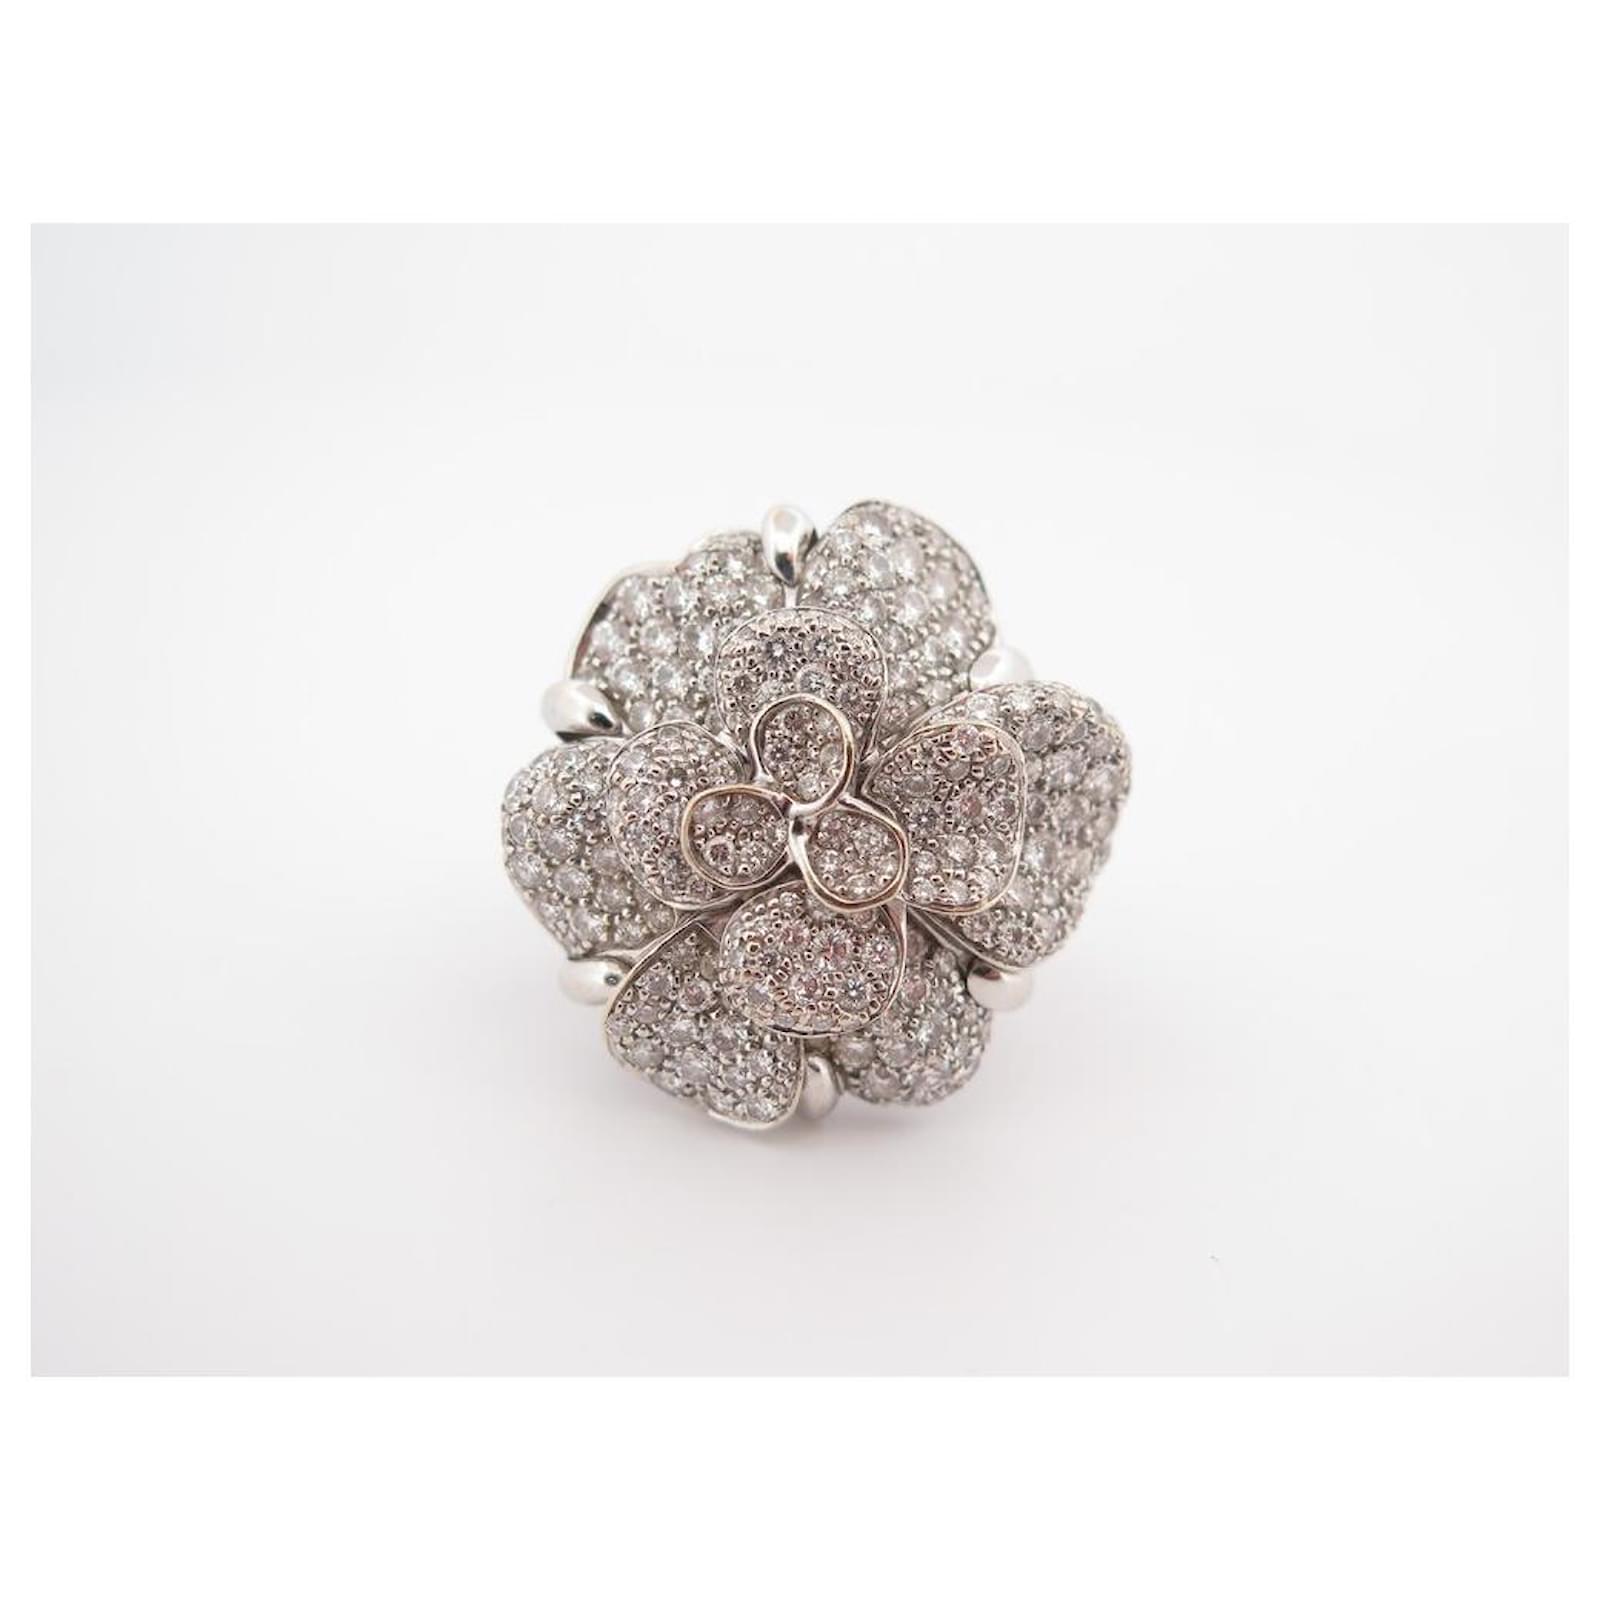 Rings Chanel Chanel Camelia T RING55 in White Gold 18K and Diamonds 3.45ct Gold Diamonds Ring